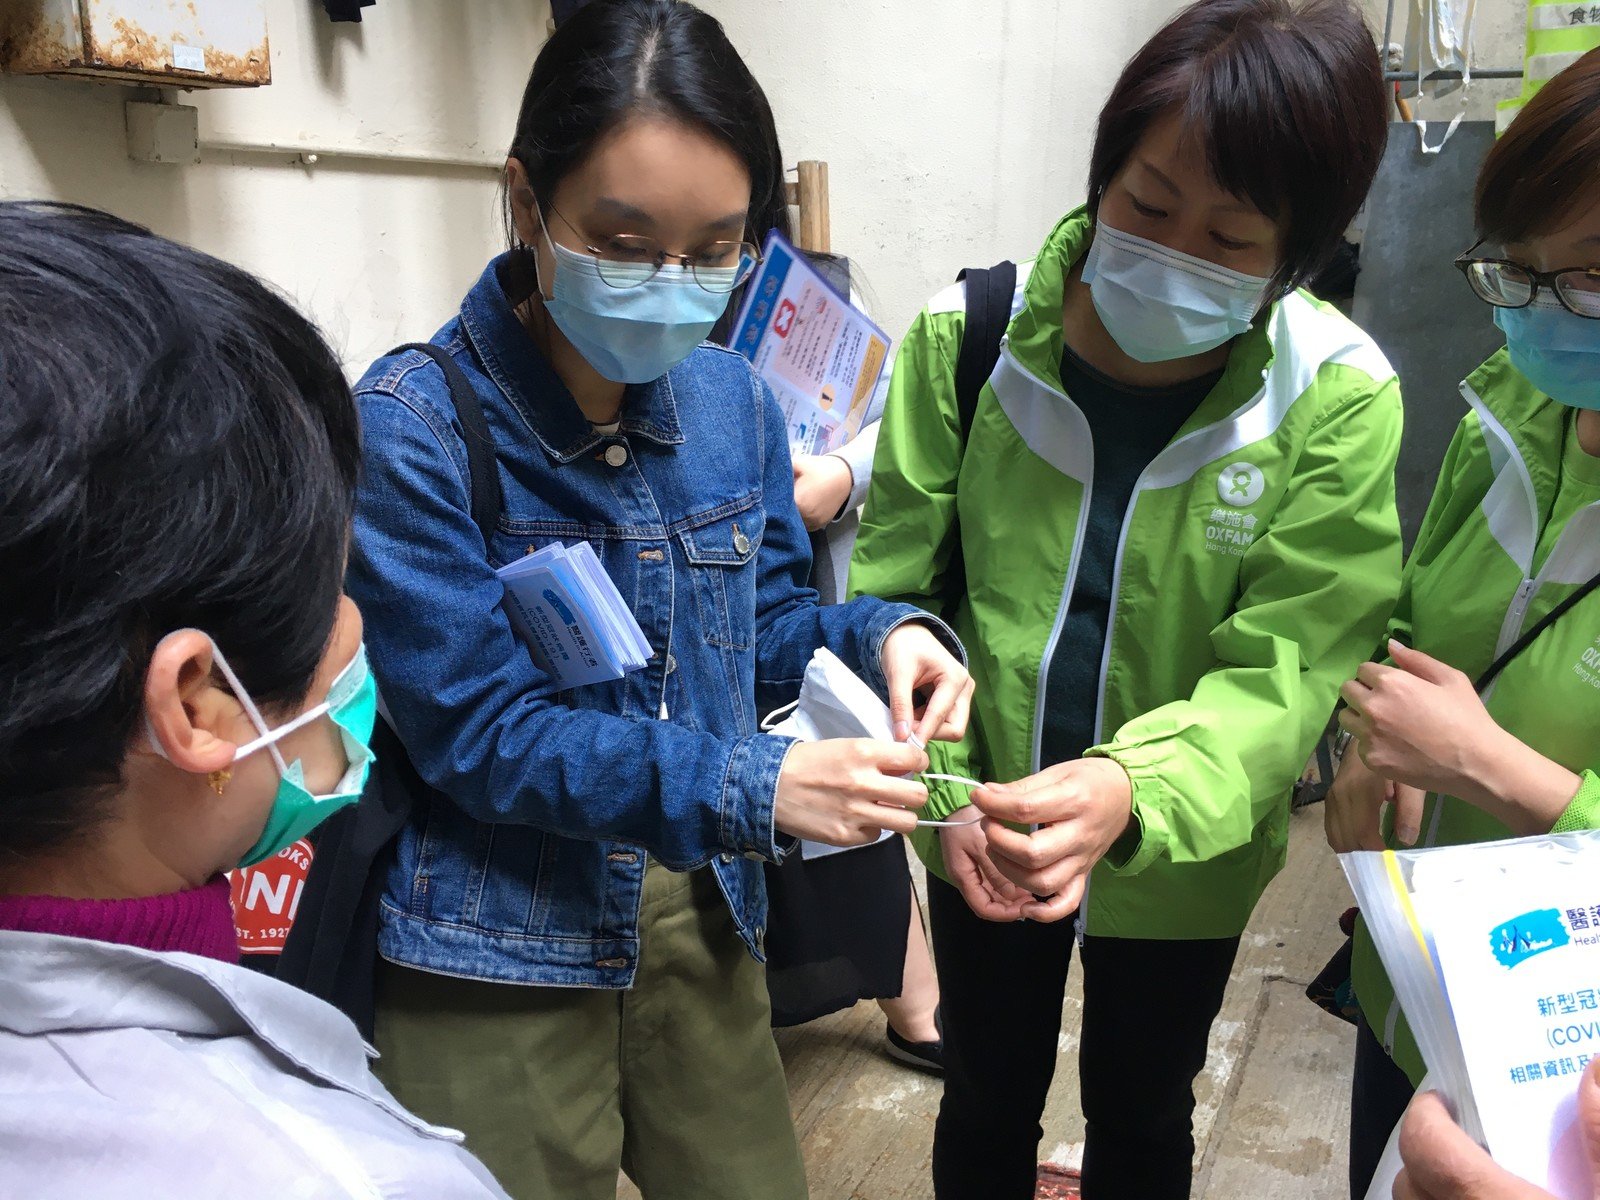 Staff from Oxfam Hong Kong and Health In Action explained how to put on and take off a mask properly at the Oil Street Refuse Collection Point.